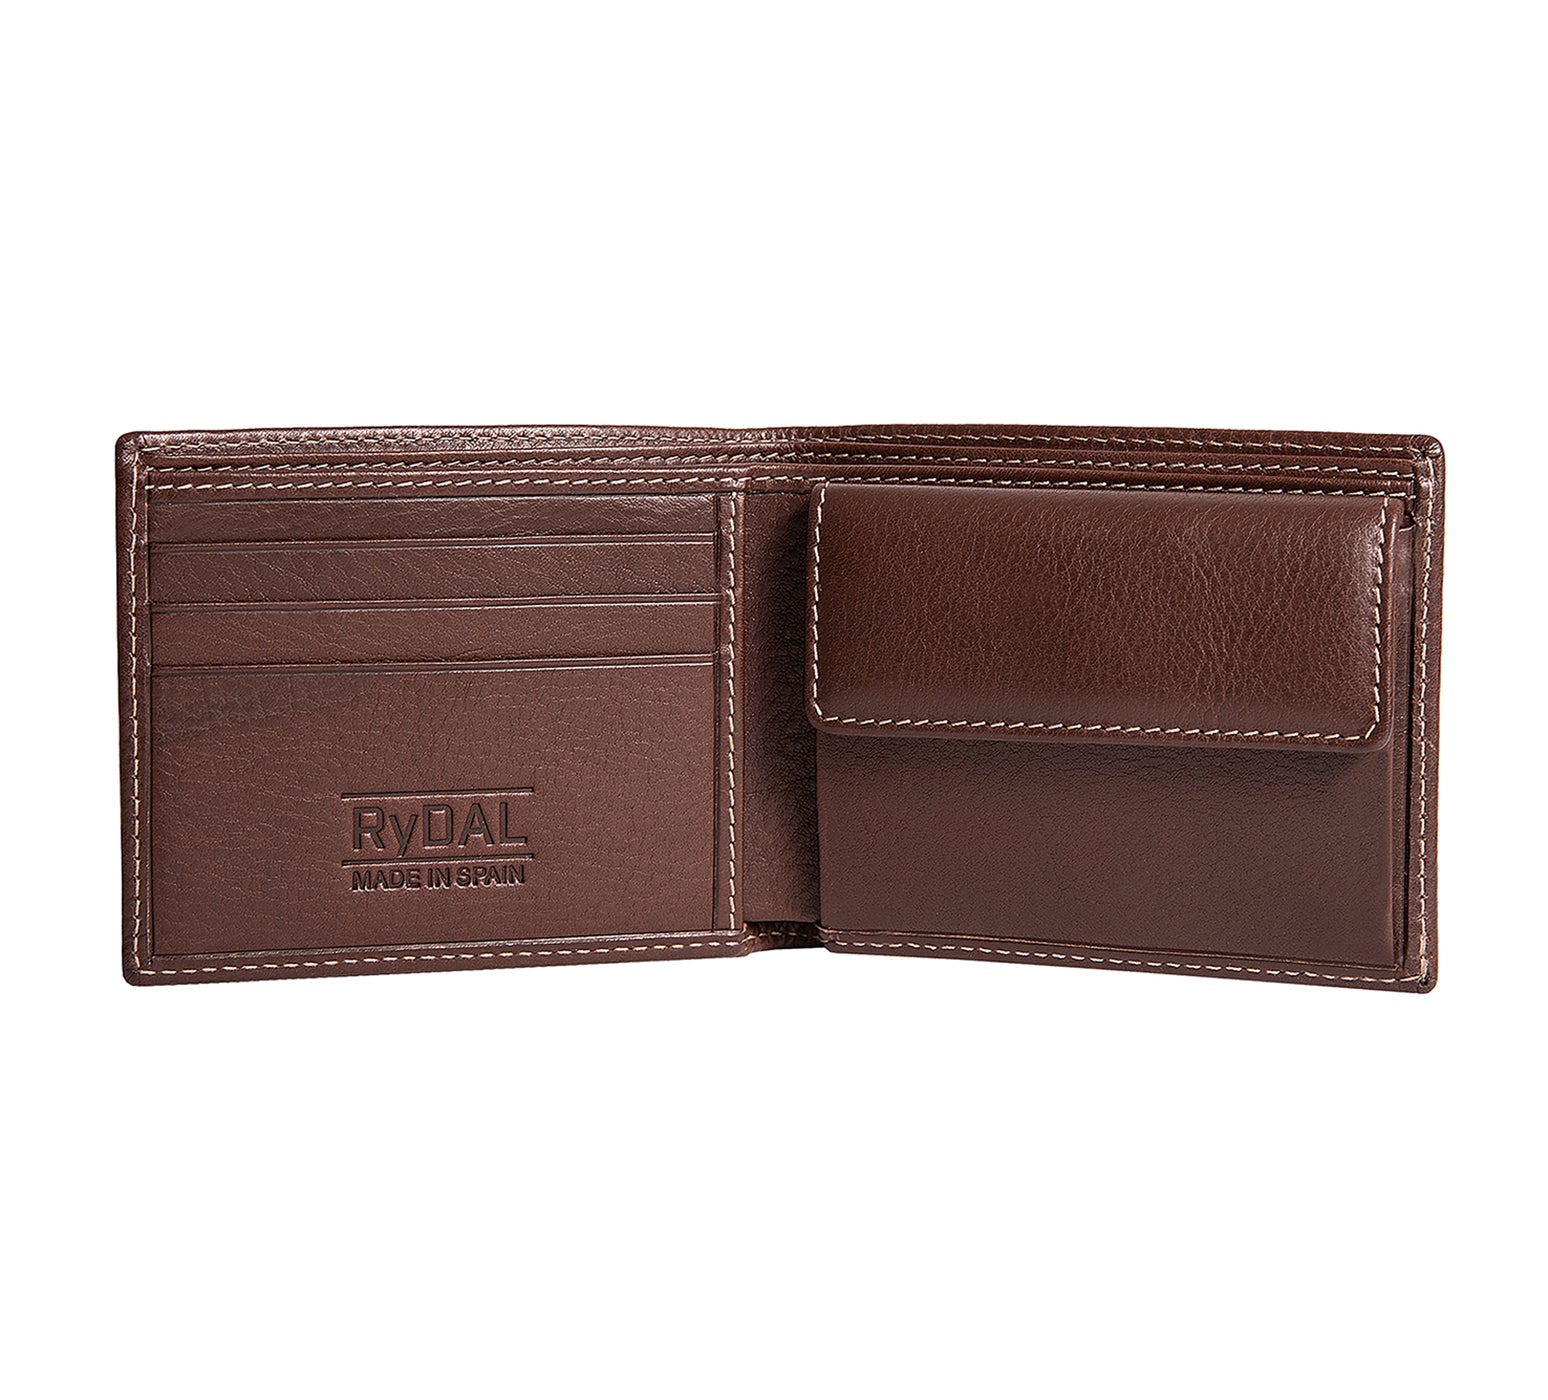 Mens Leather Wallet with Coin Pocket from Rydal in 'Dark Brown' showing interior.